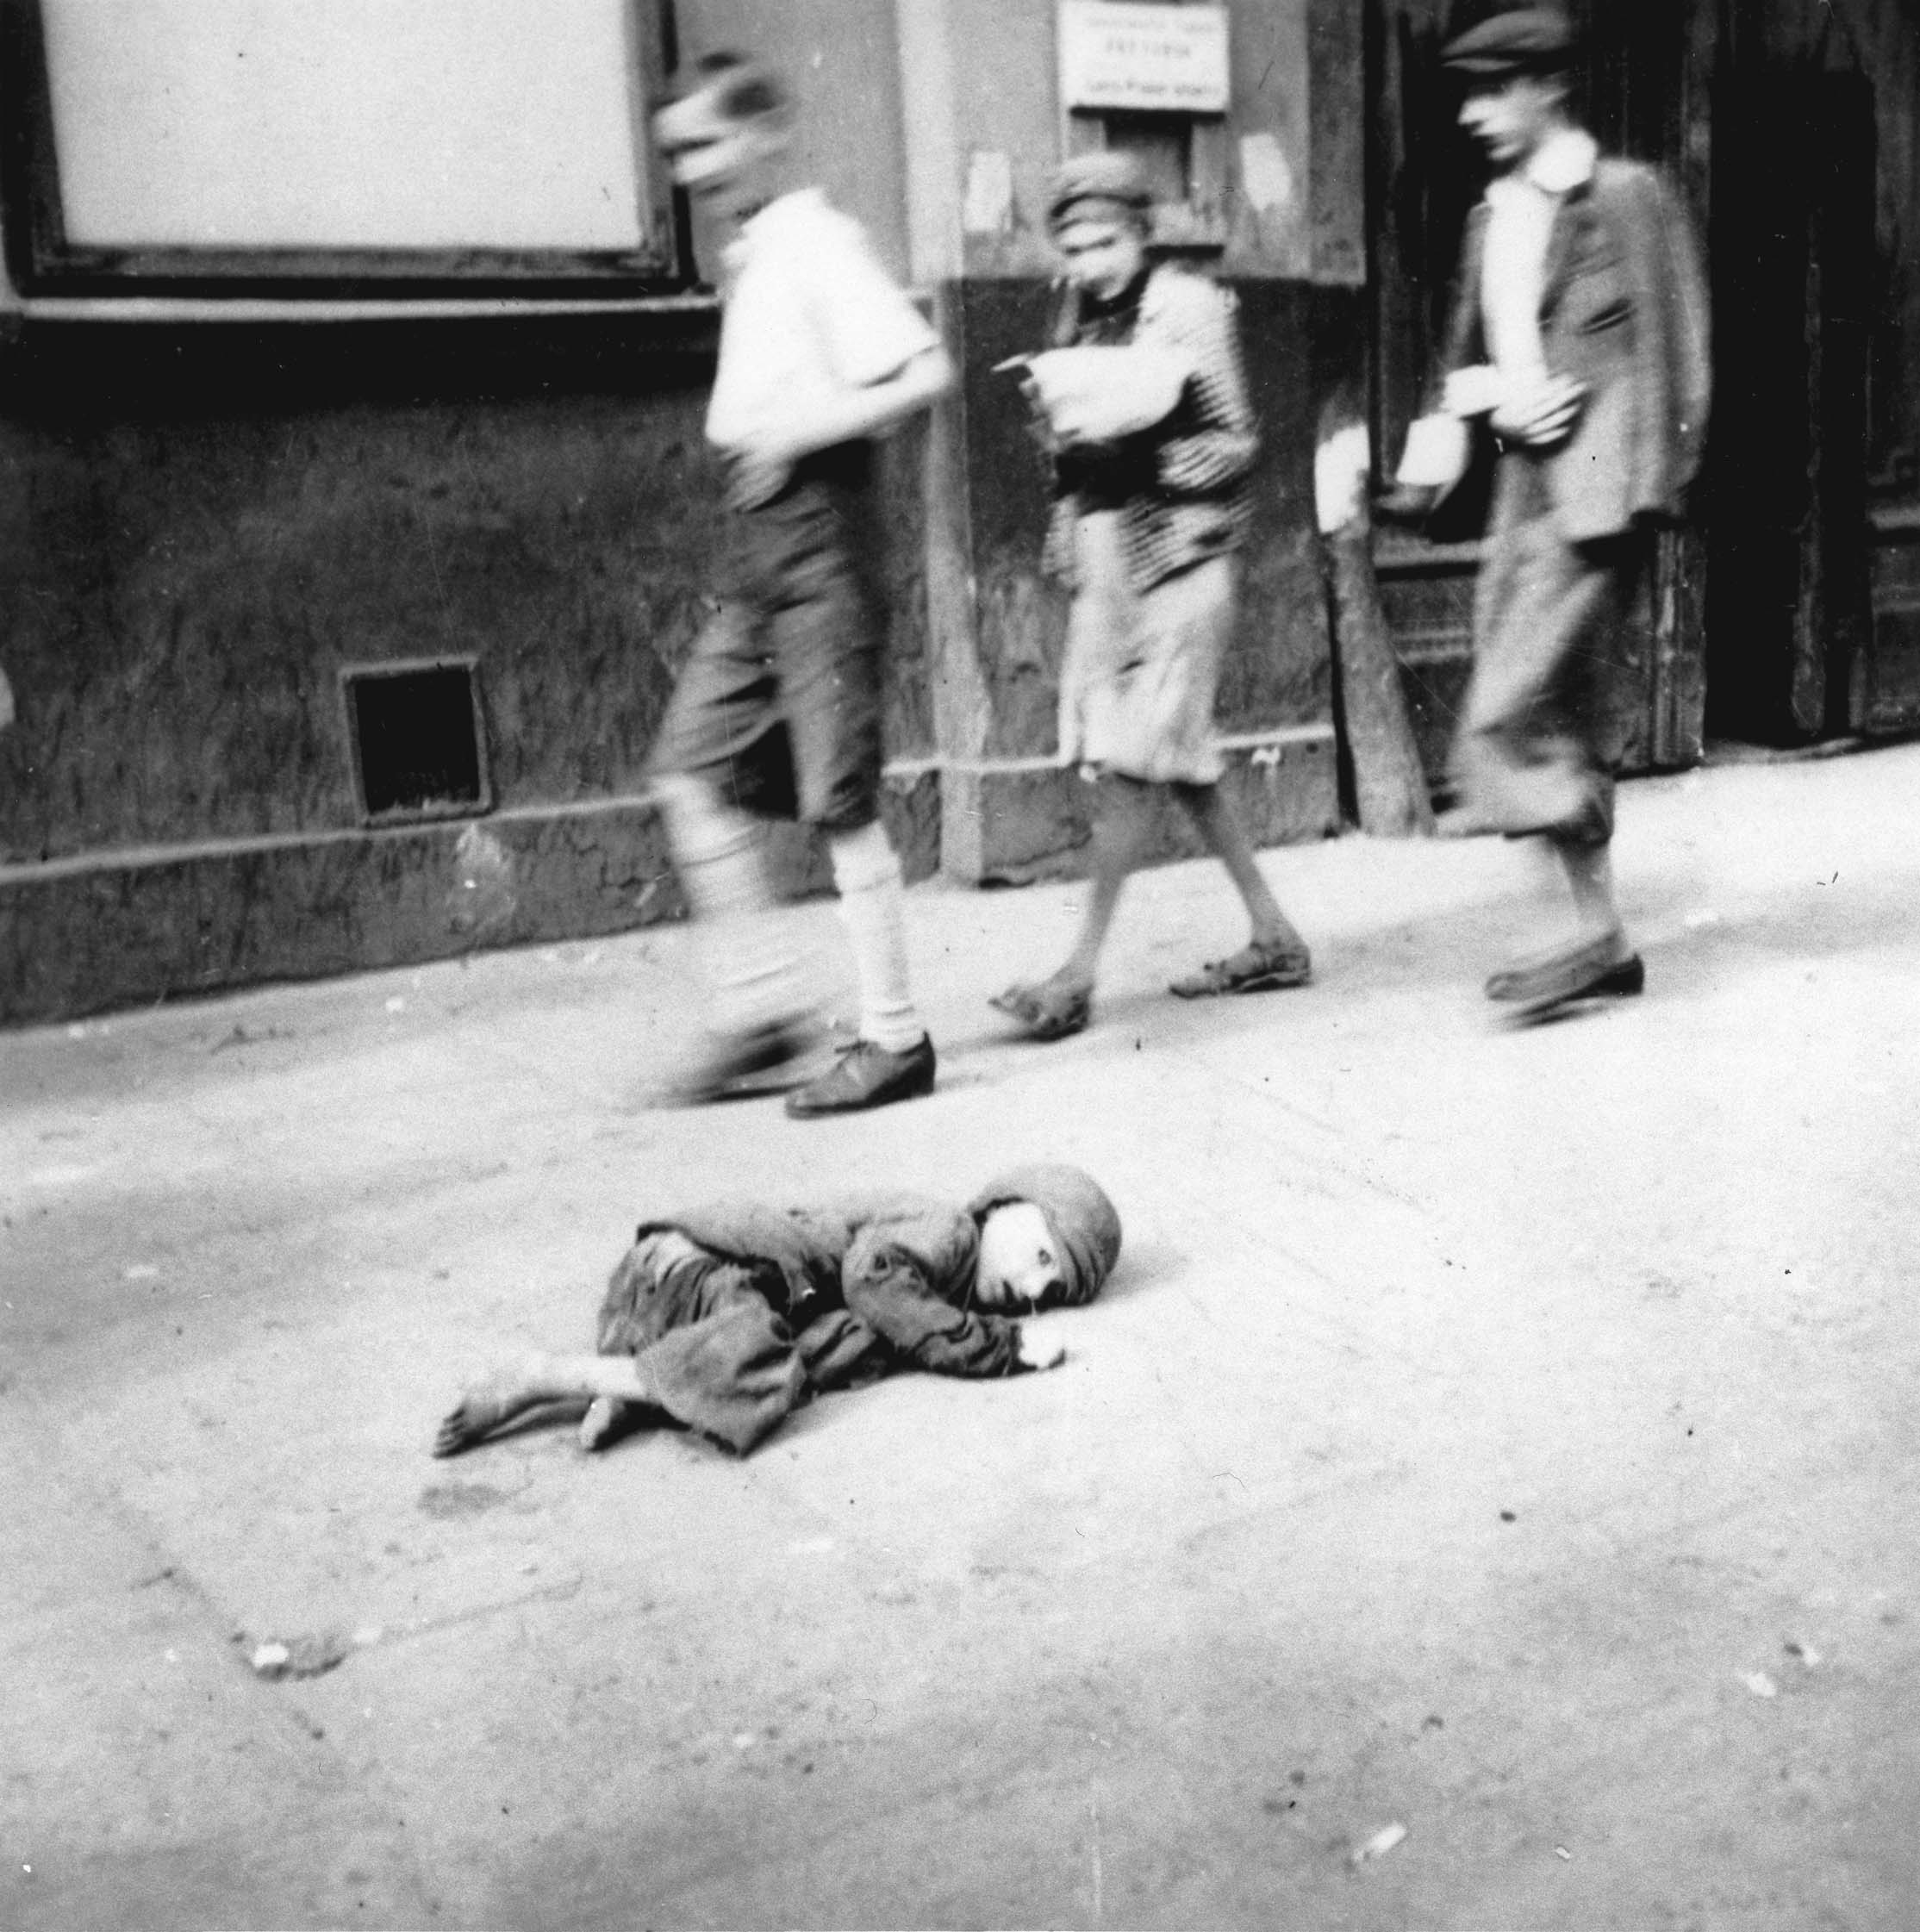 A starving, helpless child lies on the streets of the Warsaw Ghetto, Sep 1941